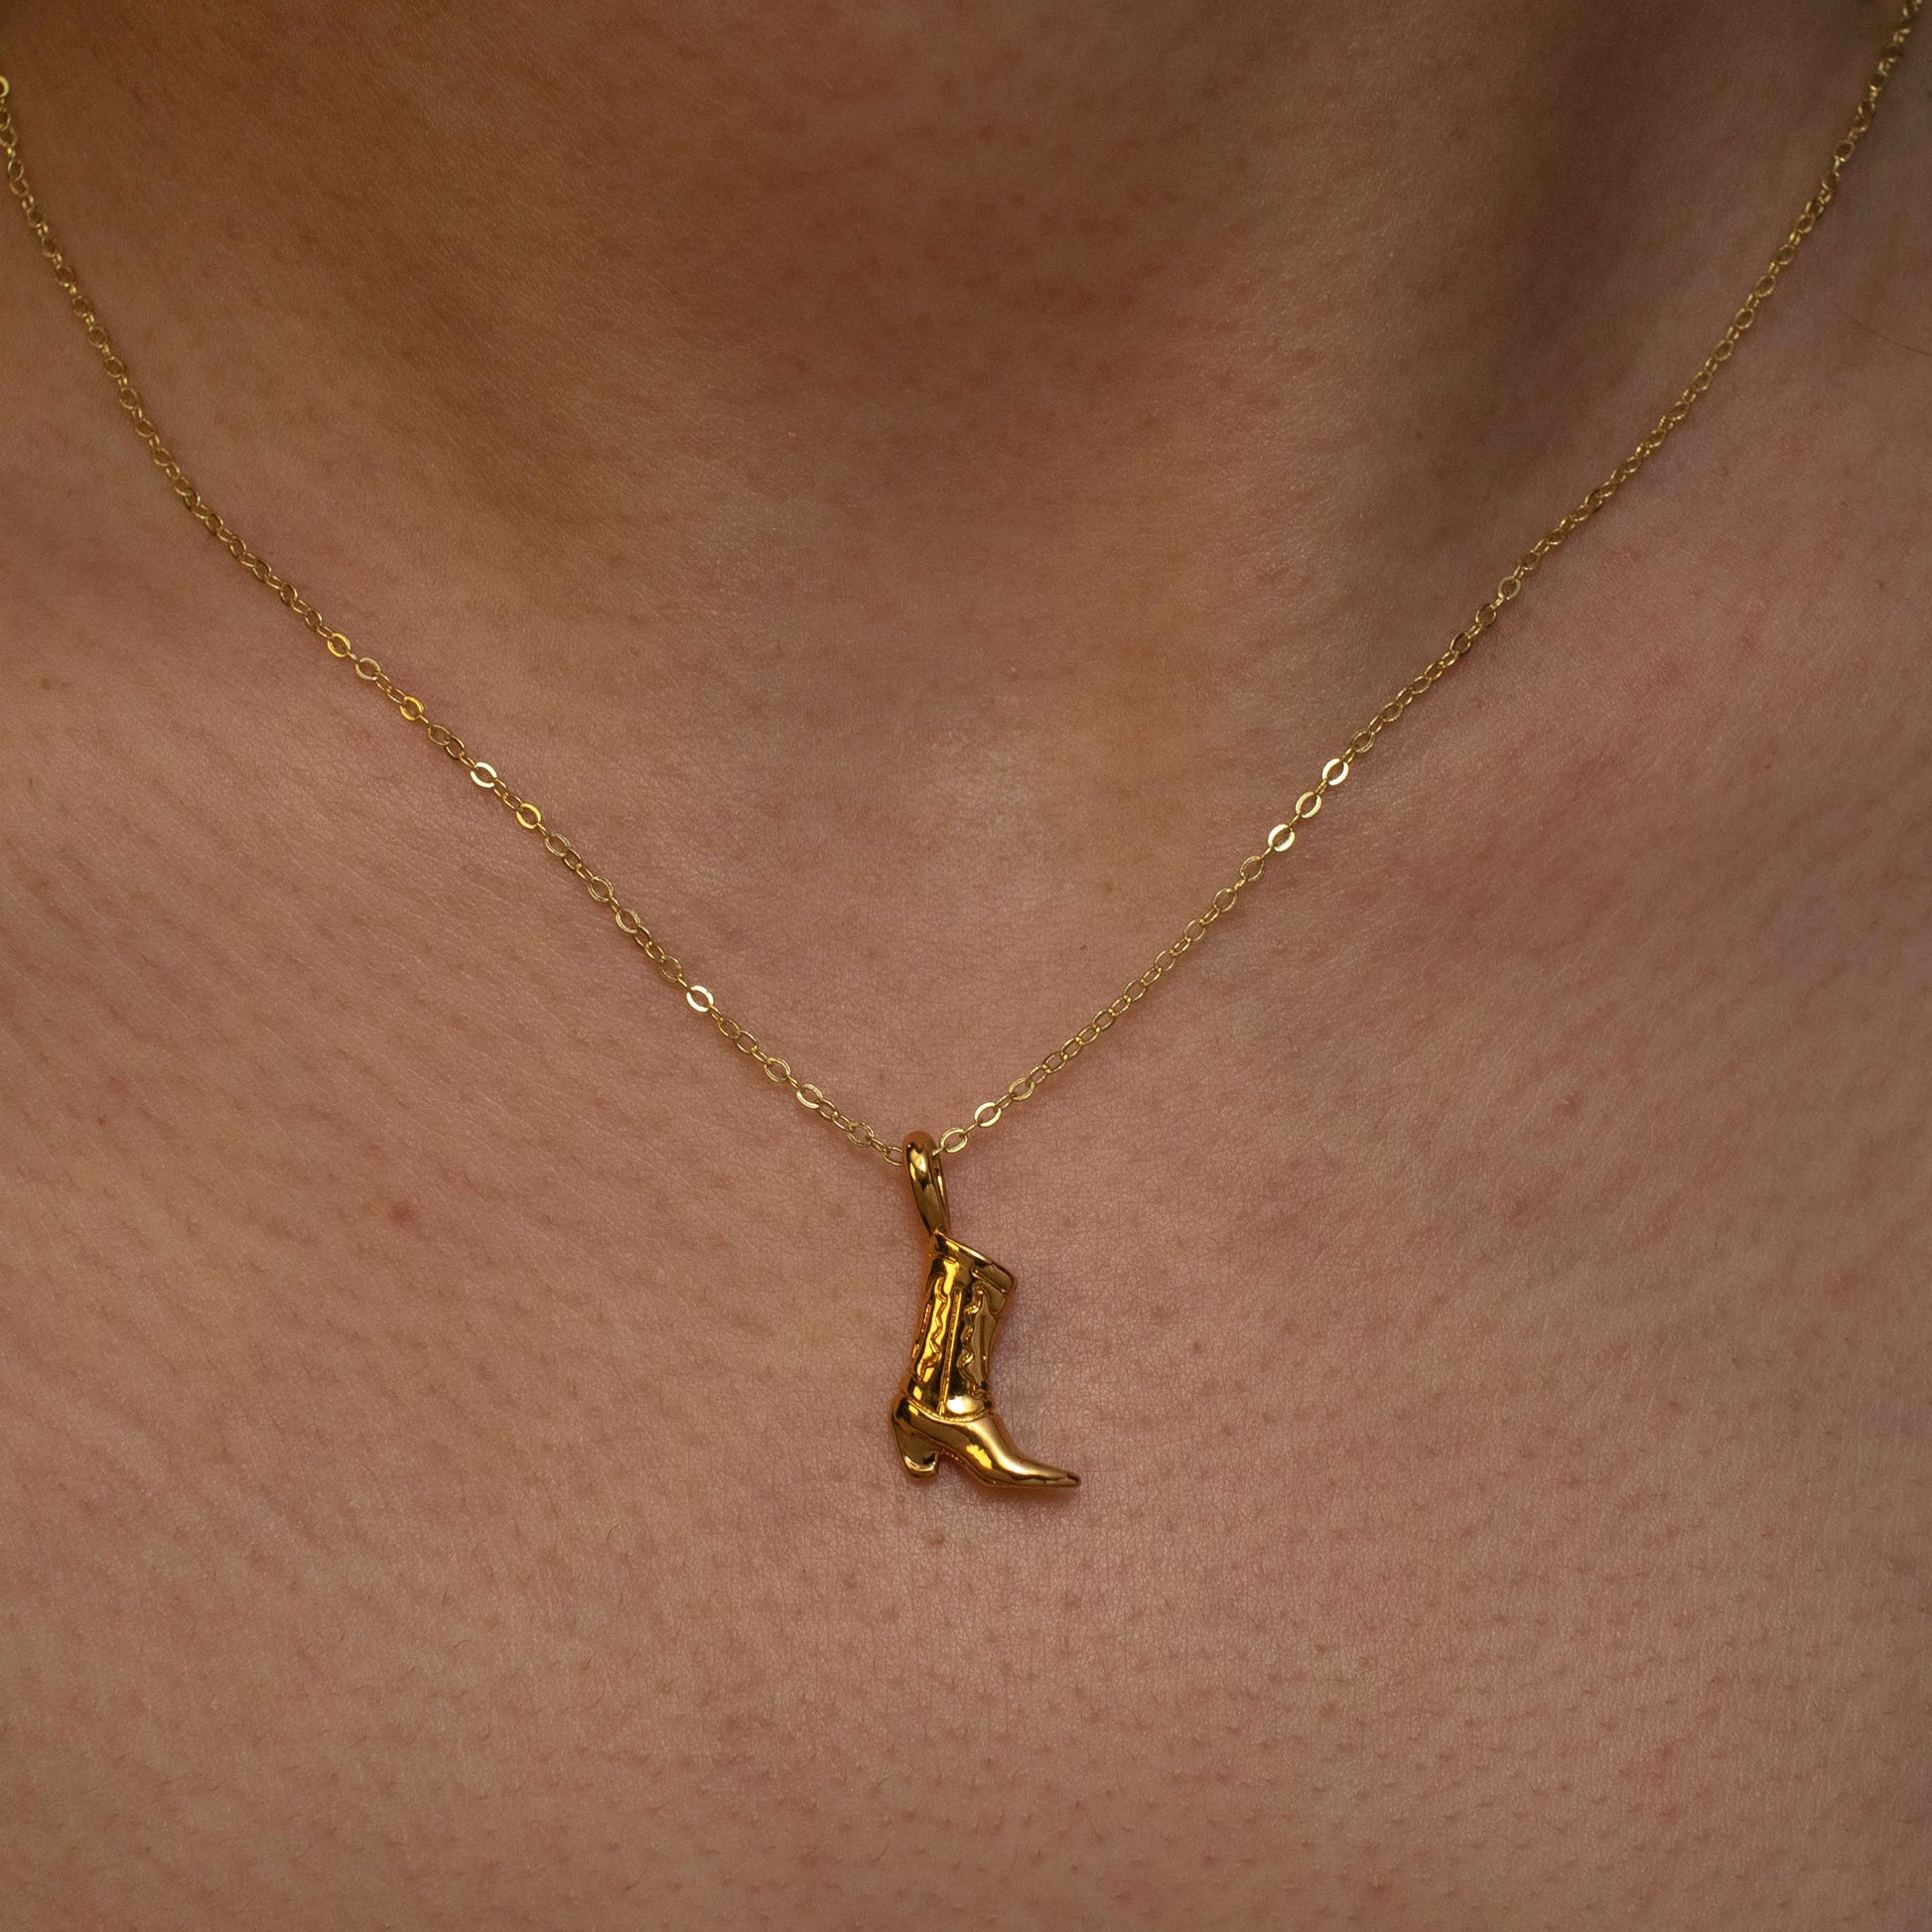 This photo features a thin chain necklace made of 14K gold-plated sterling silver, paired with a cute cowboy boot pendant. It's a sophisticated, elegant, and minimalist jewelry.